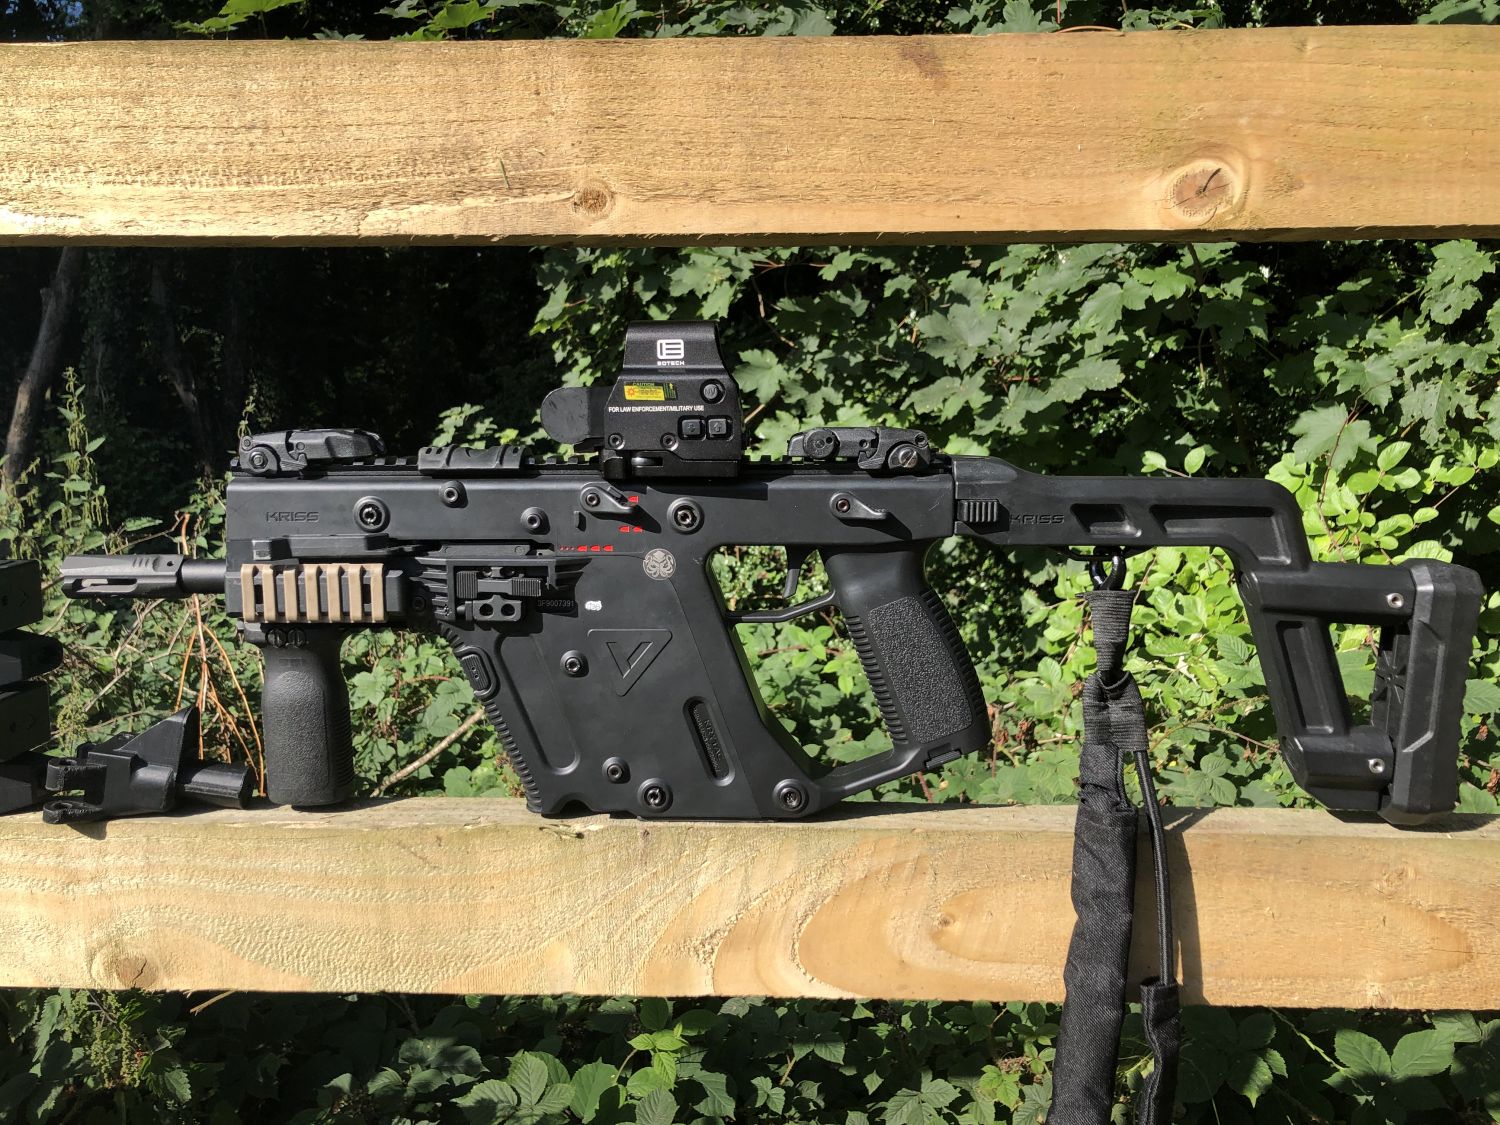 Krytac Kriss Vector with accessories - Electric Rifles - Airsoft Forums UK